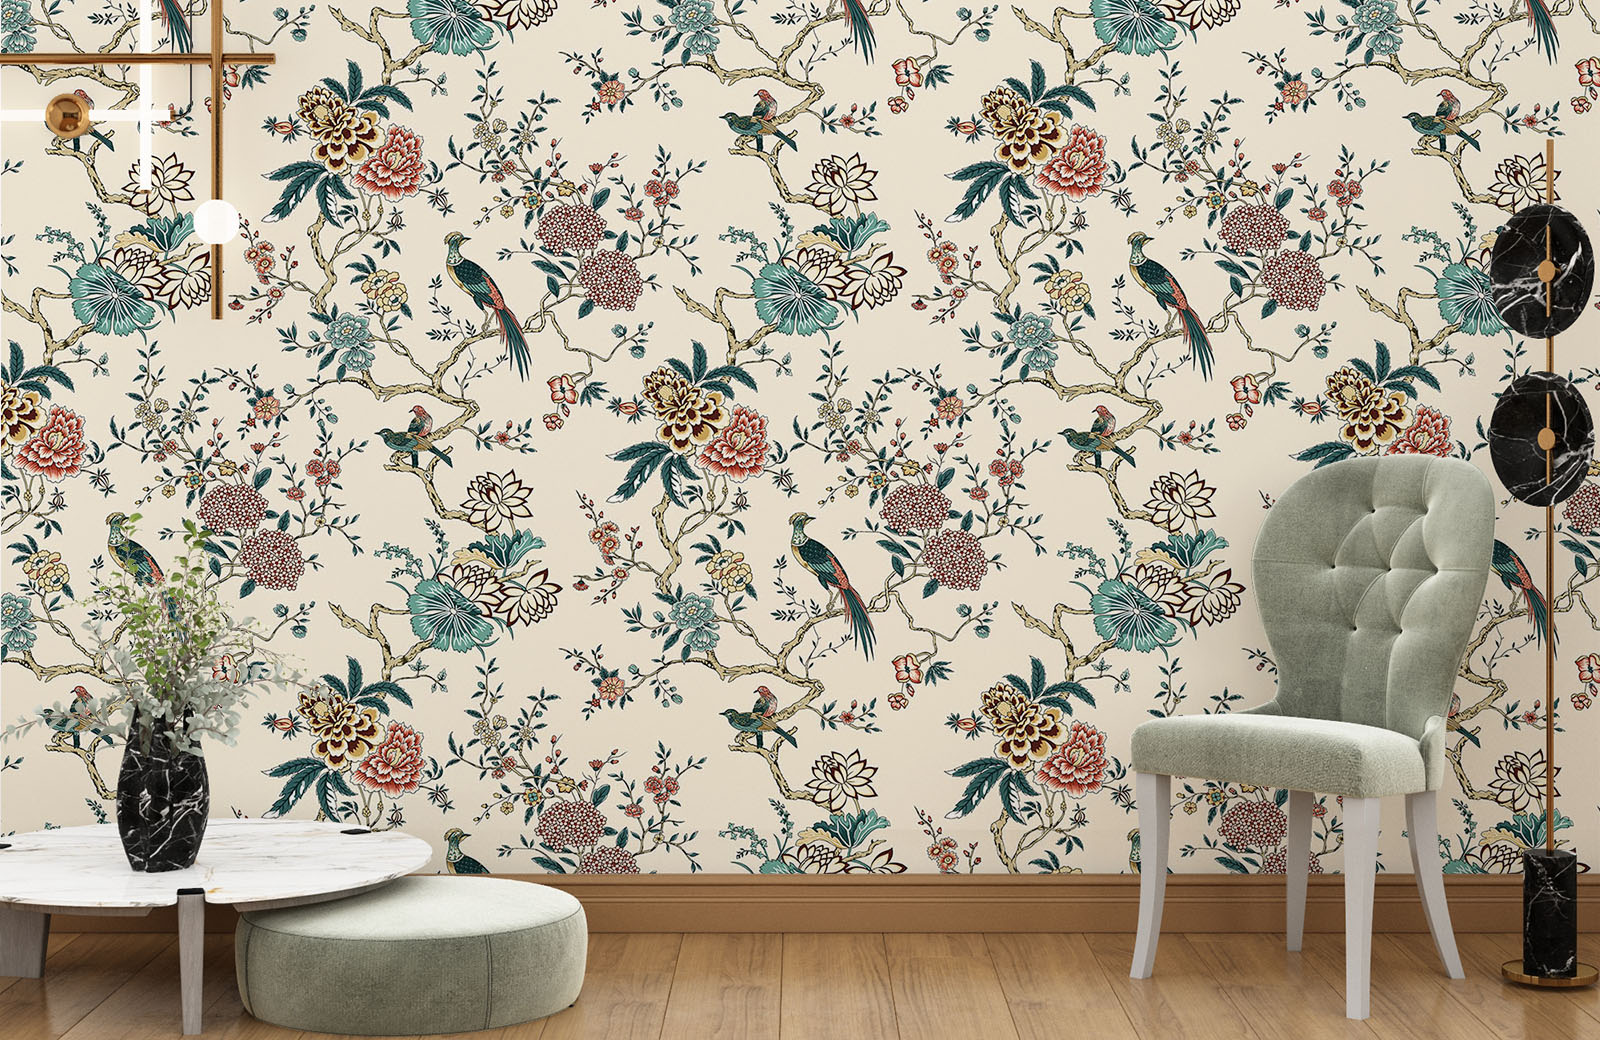 chinoiserie-pattern-with-birds-and-flowers-wallpaper-with-chair